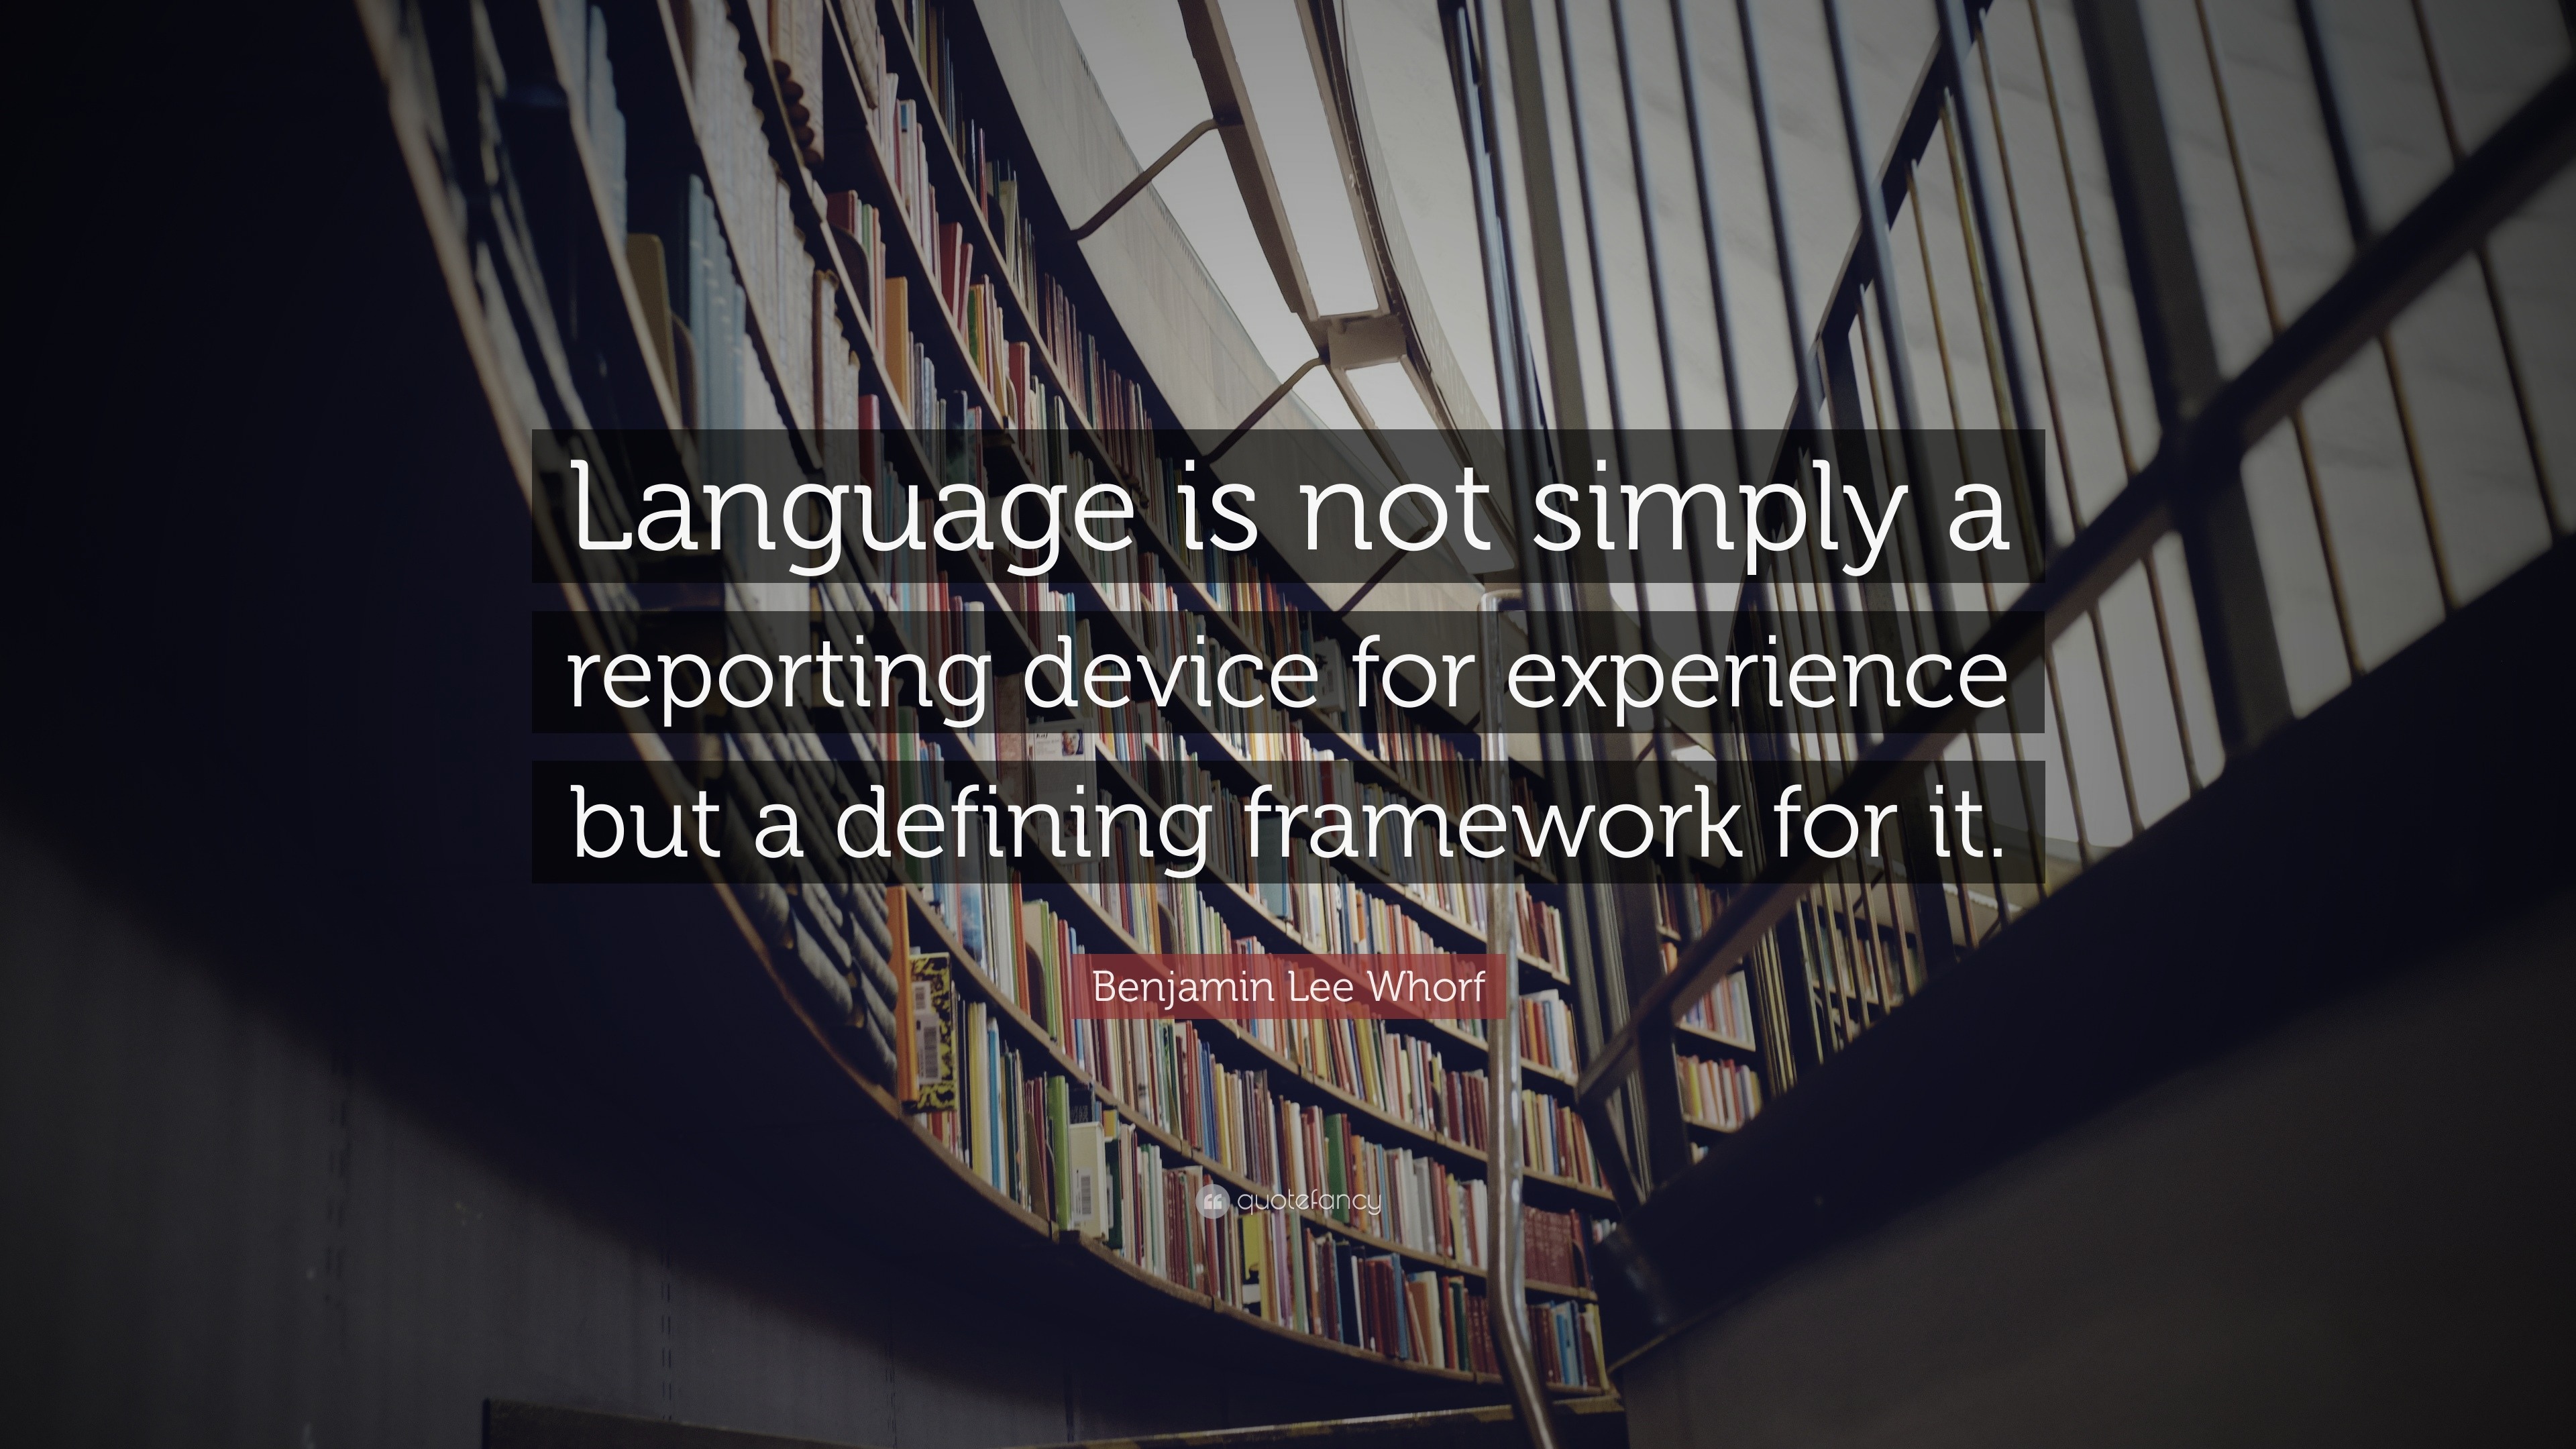 Benjamin Lee Whorf Quote: “Language is not simply a reporting device for  experience but a defining